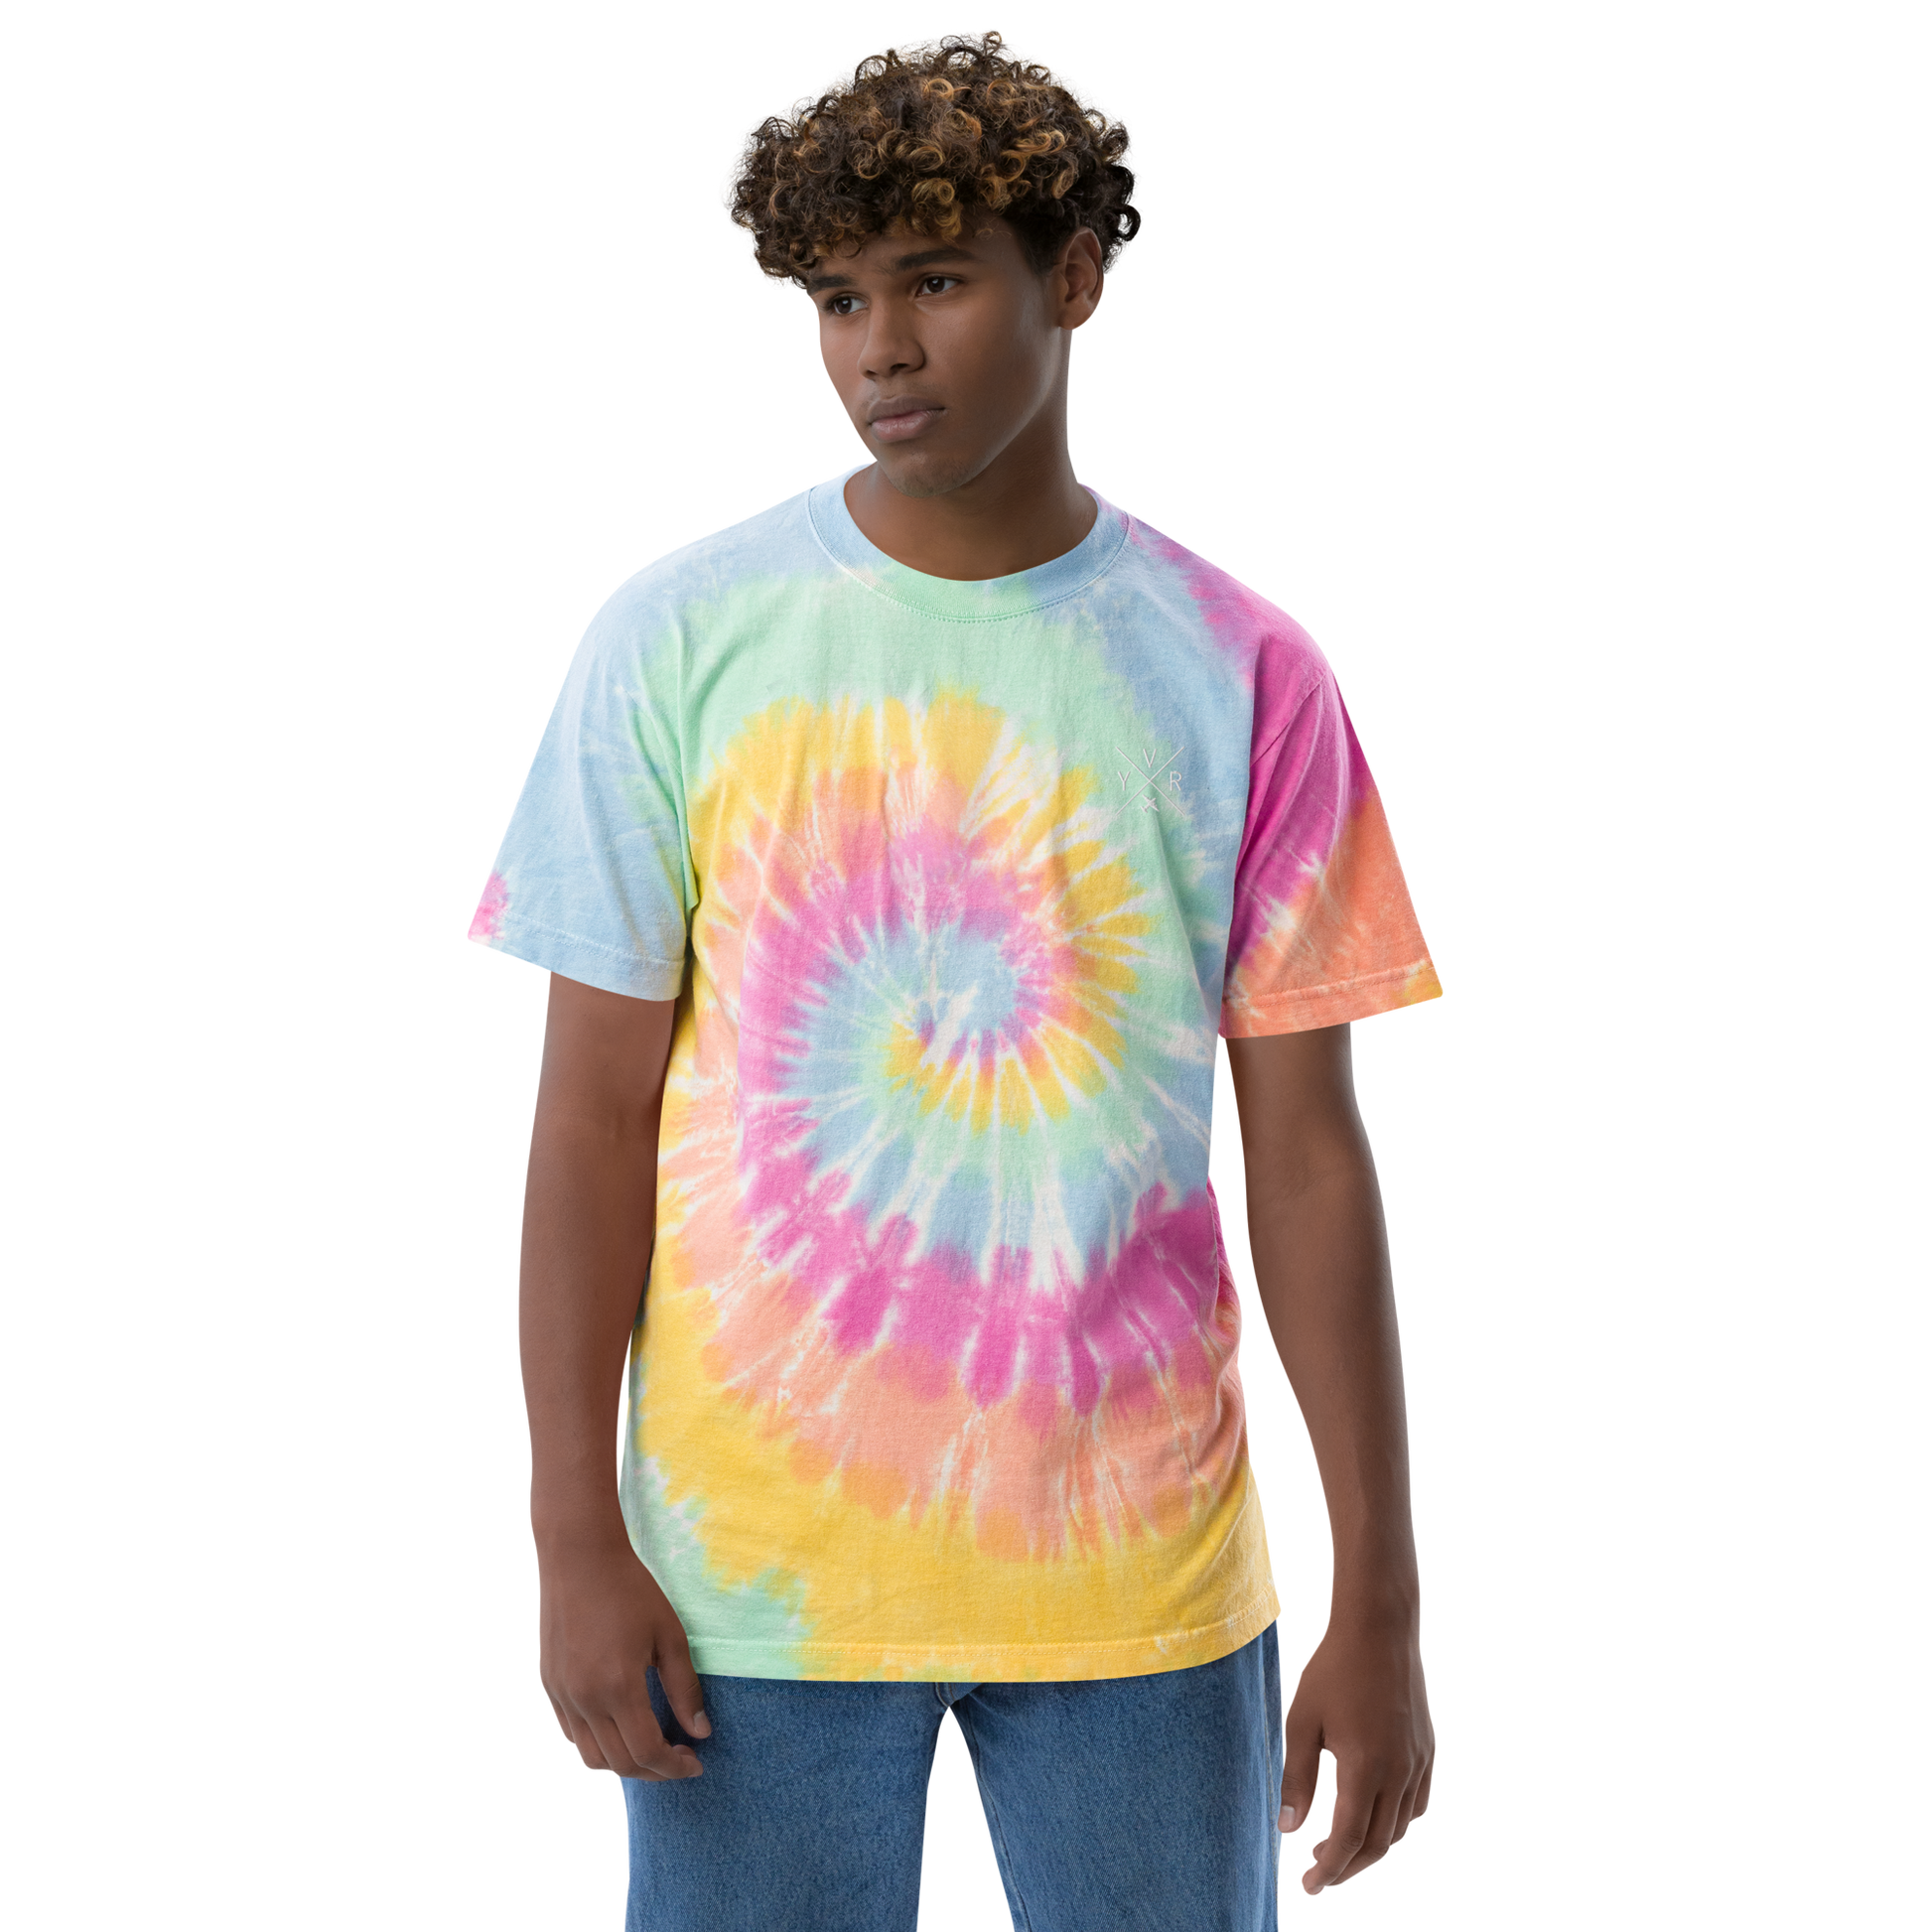 Crossed-X Oversized Tie-Dye T-Shirt • YVR Vancouver • YHM Designs - Image 04